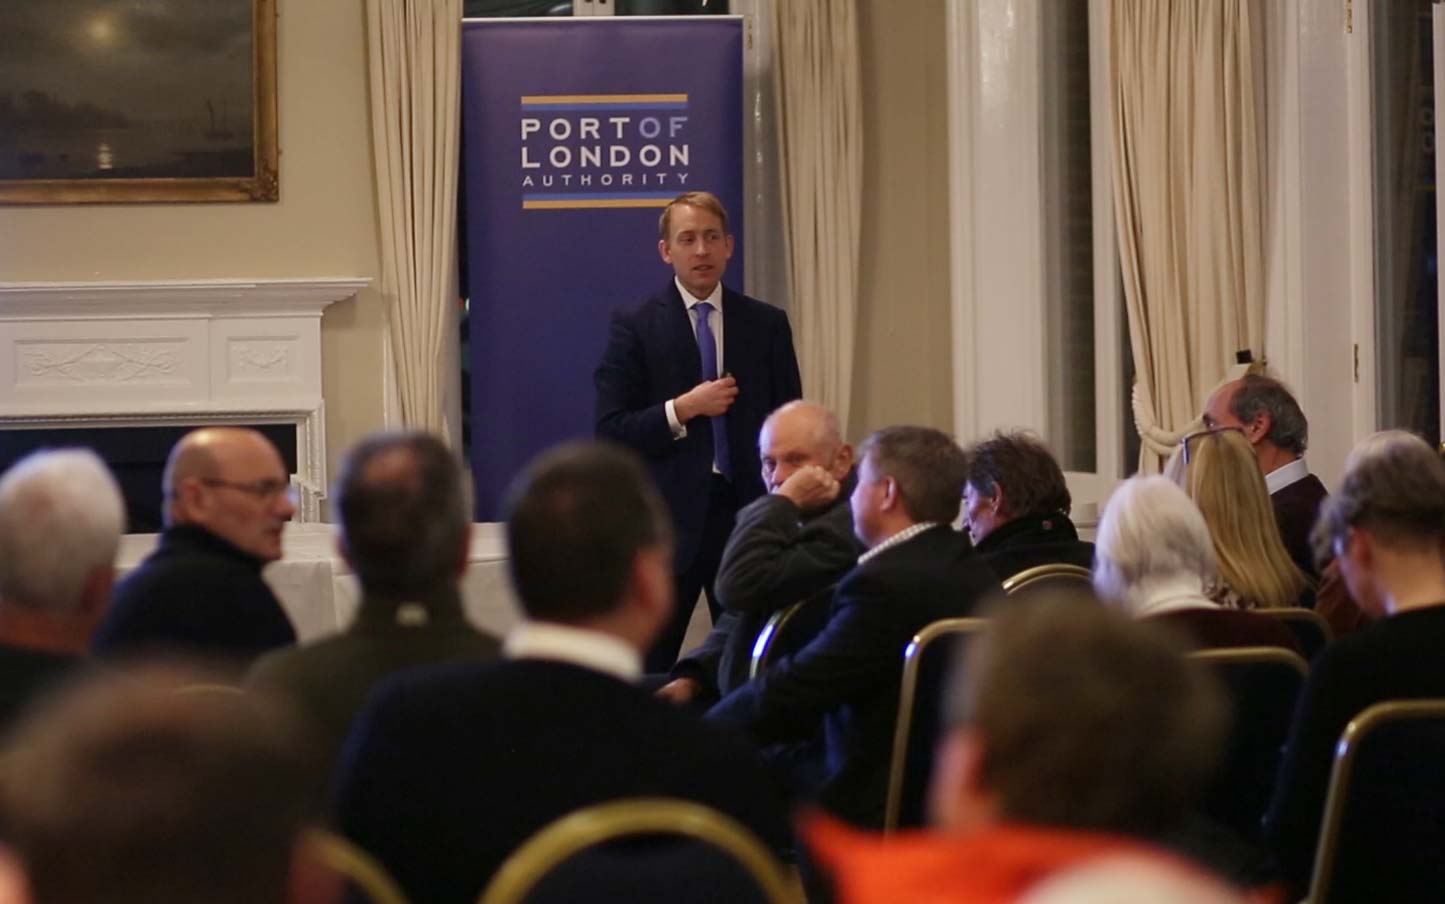 Port of London Authority Chief Executive Robin Mortimer speaks at a public meeting on 25 February 2020.